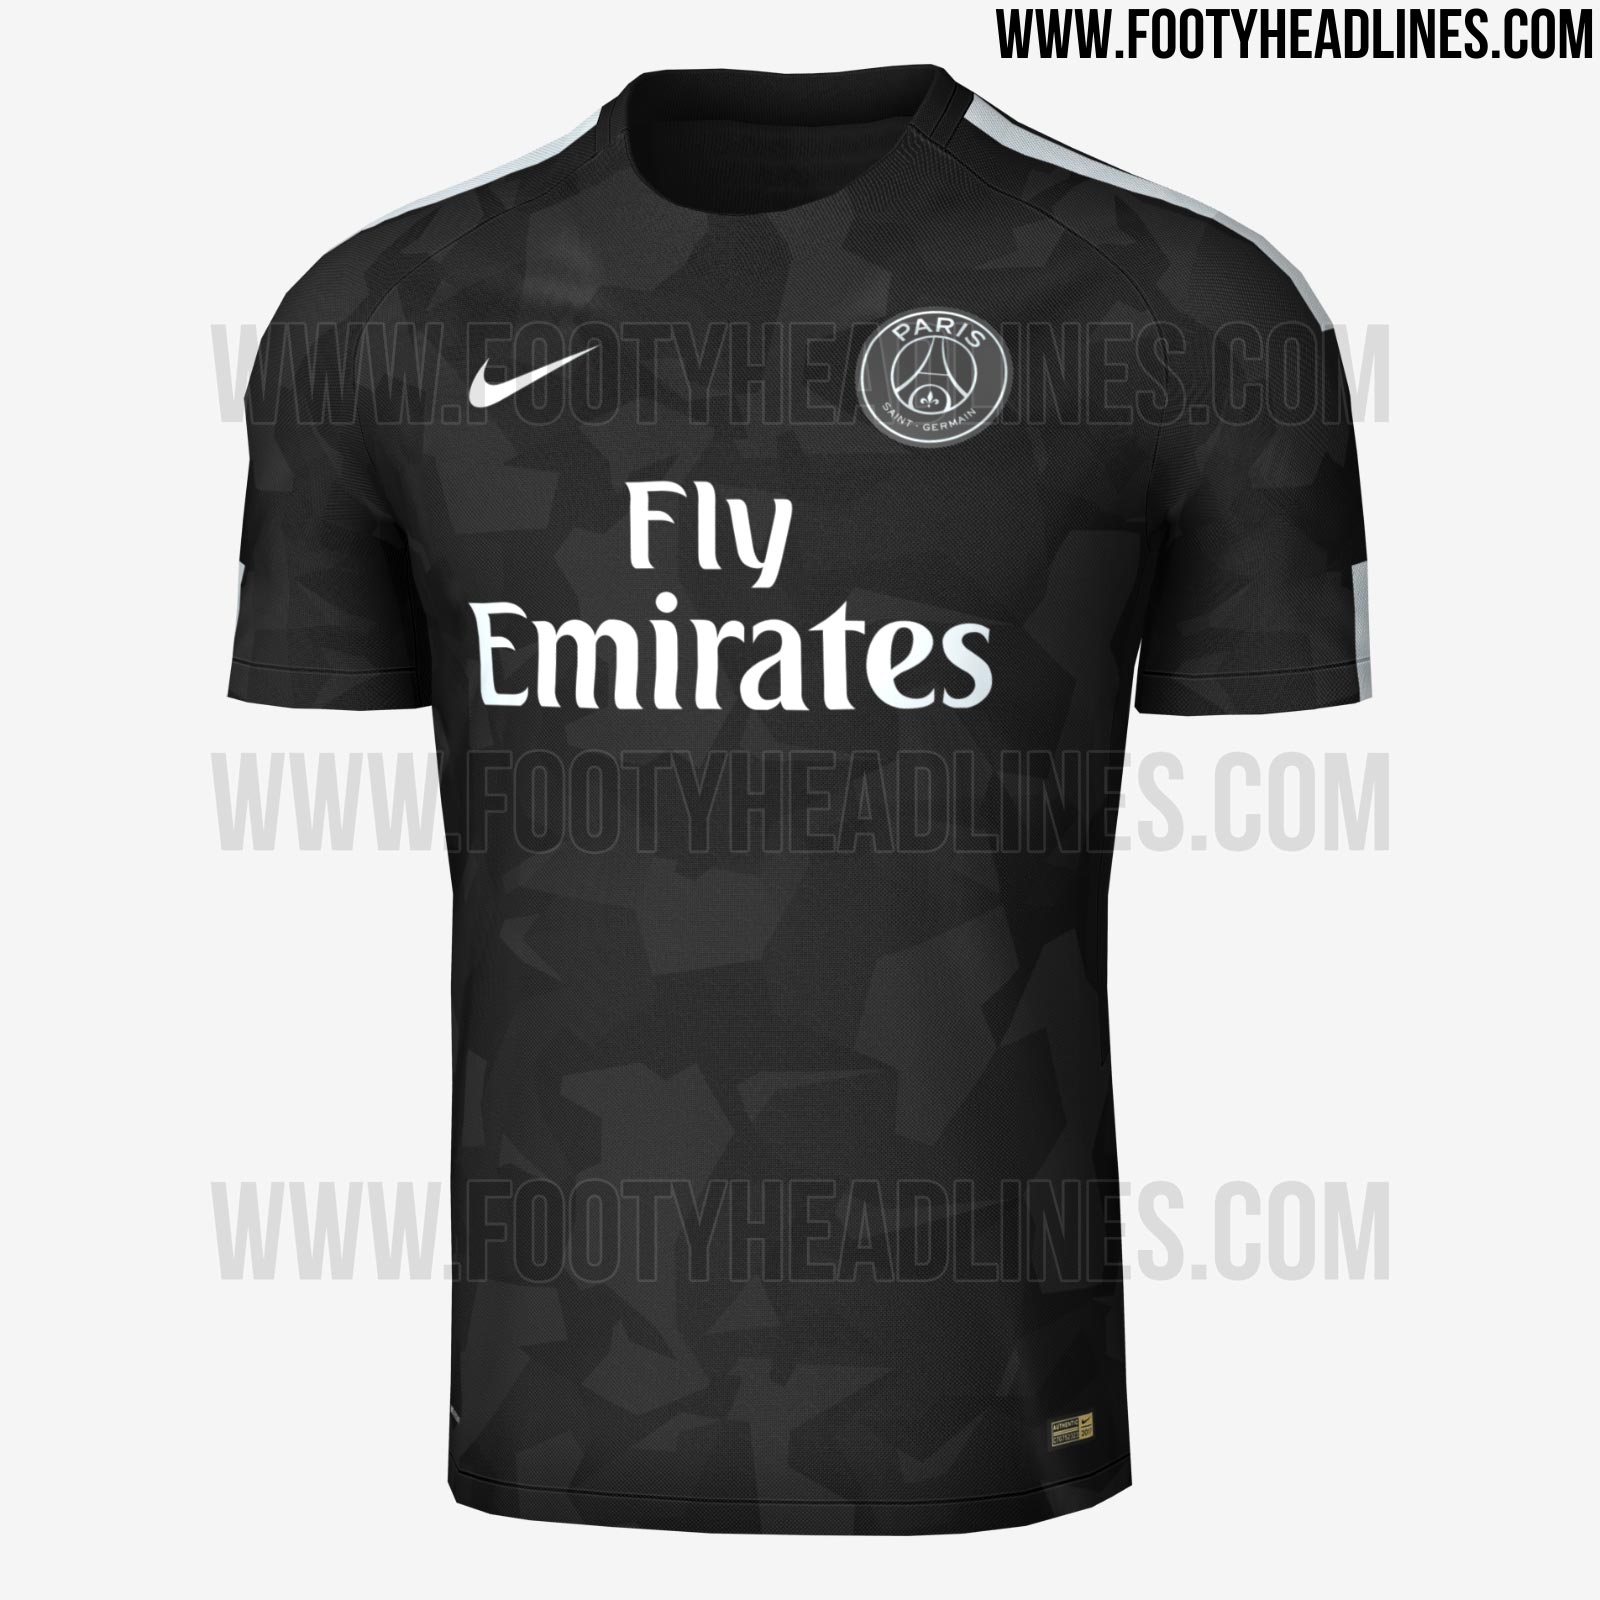 New kit! What do you guys think about it? : r/psg